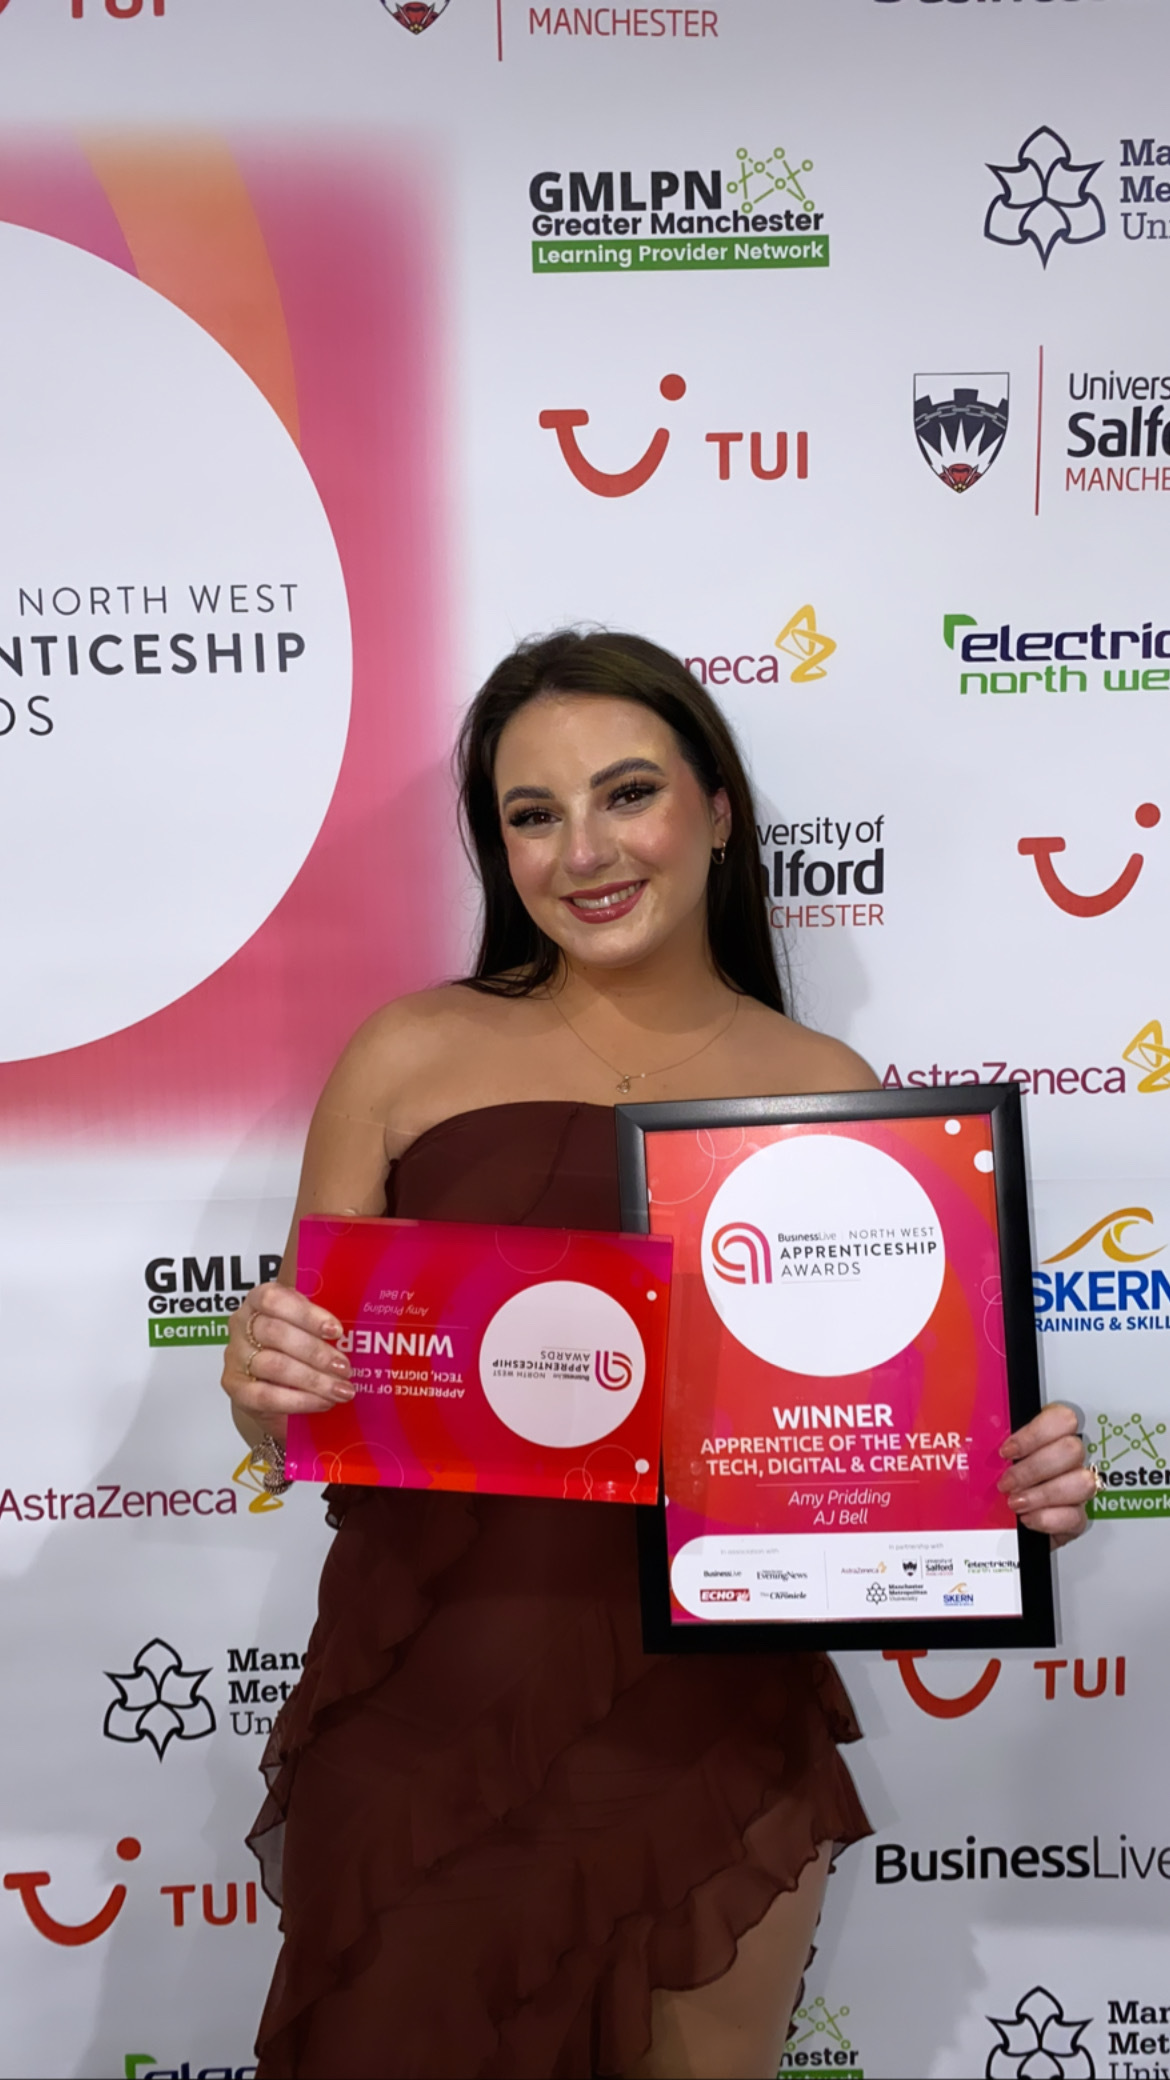 Last year, Amy won North West Apprentice of the Year in Tech, Digital and Creative